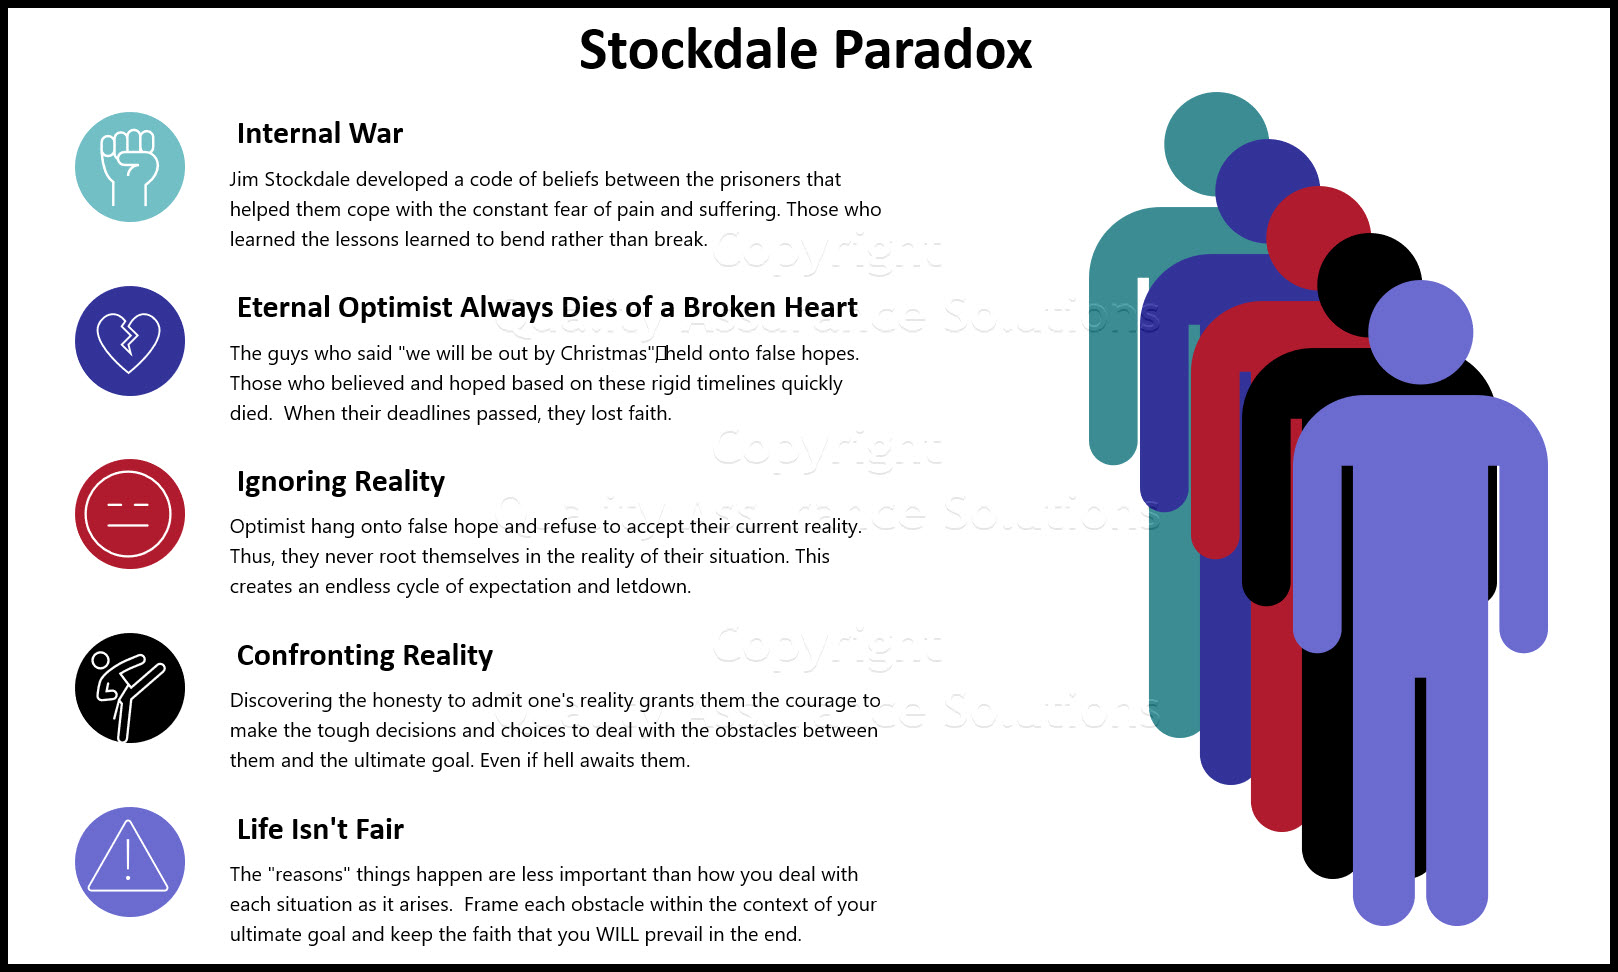 The Stockdale Paradox an idea developed by Jim Collins in his book Good To Great. Realists live and optimists die, in life and business.